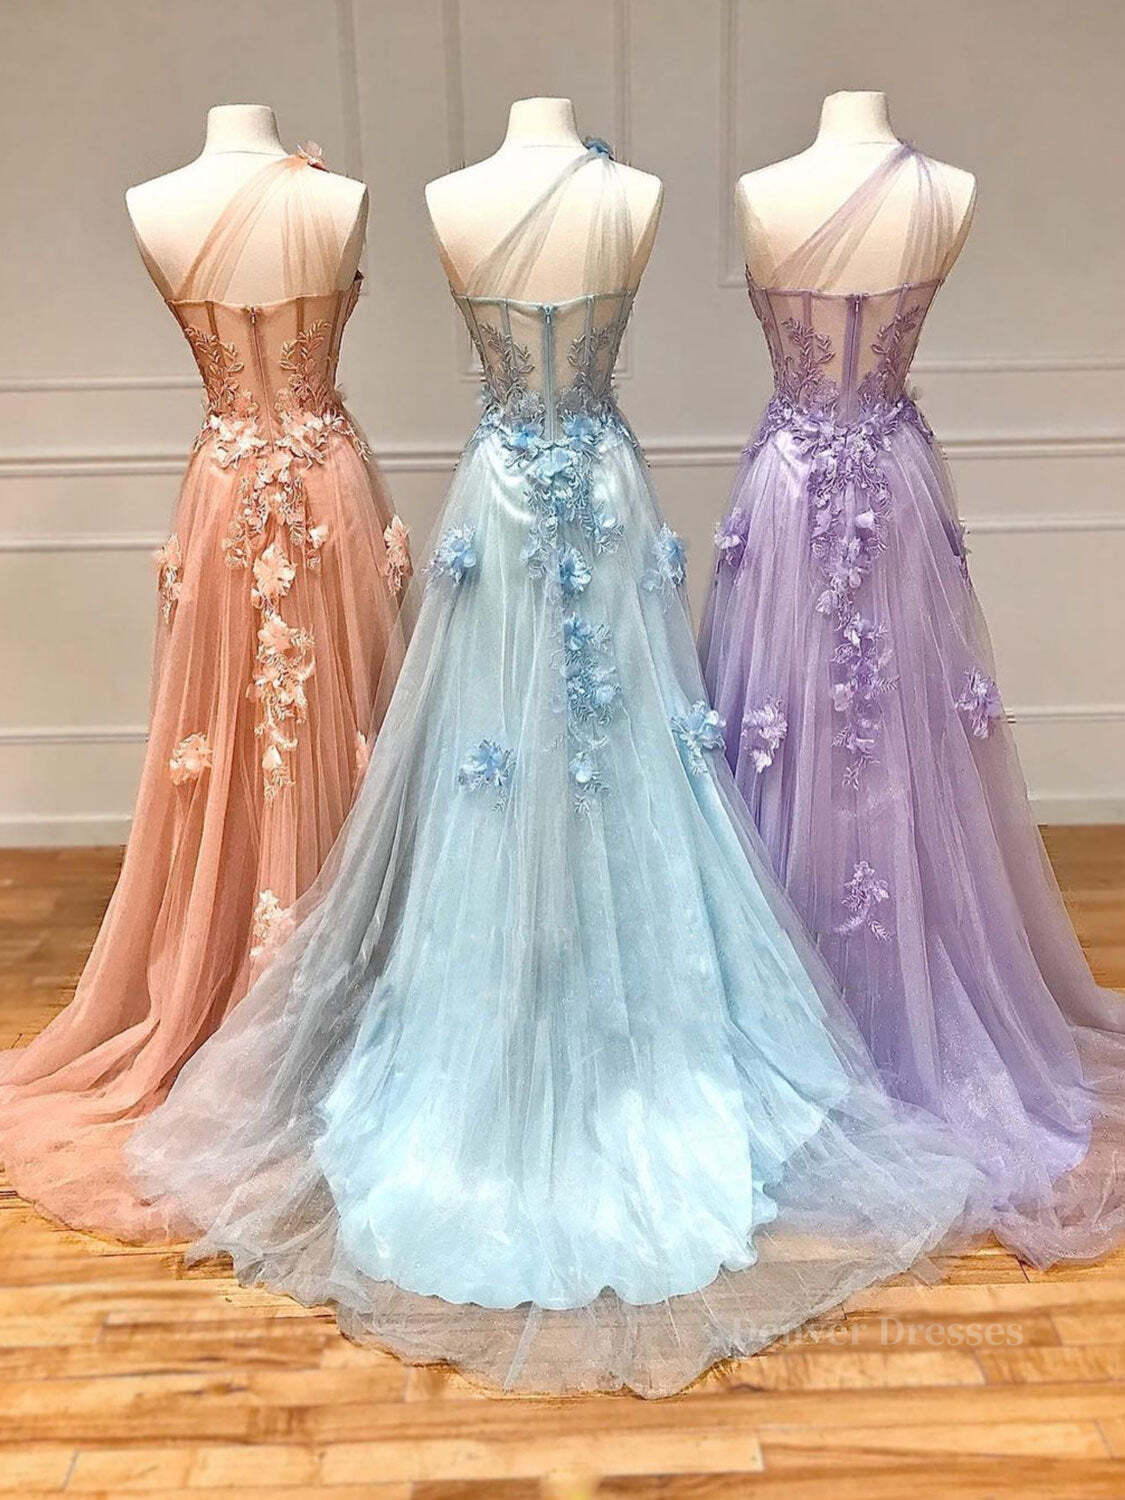 Prom Dresses For Teens Long, Unique sweetheart neck tulle lace long prom dress A line evening dress